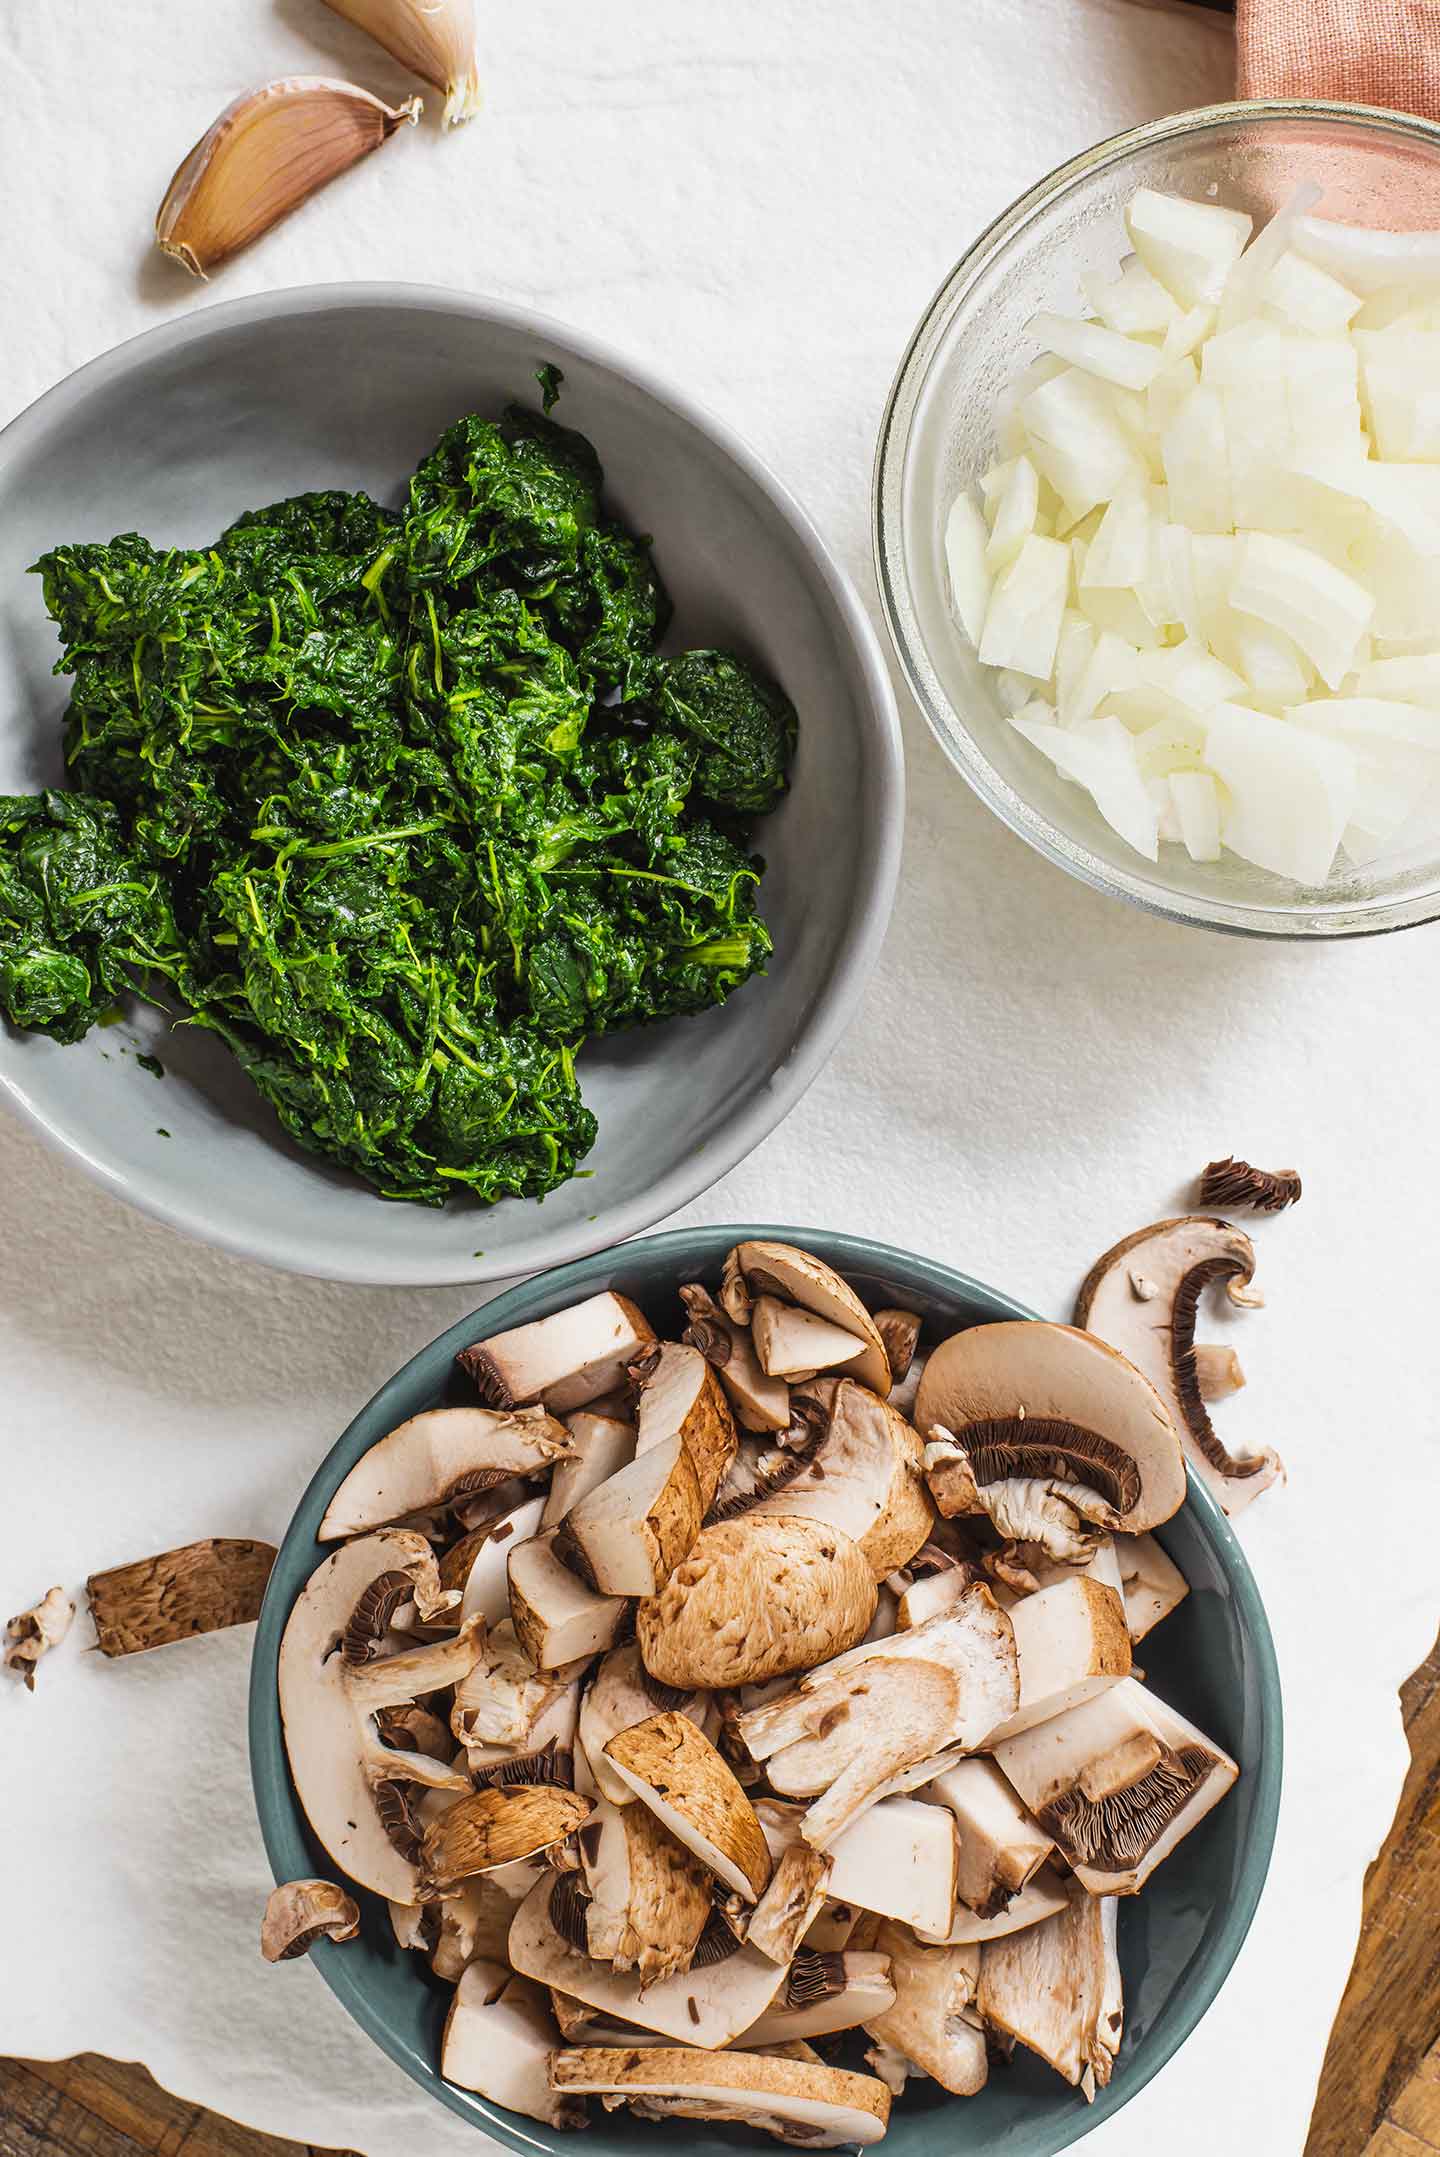 Top down view of ingredients atop a white tray. Sliced mushrooms, cooked spinach, diced onion, and garlic cloves.